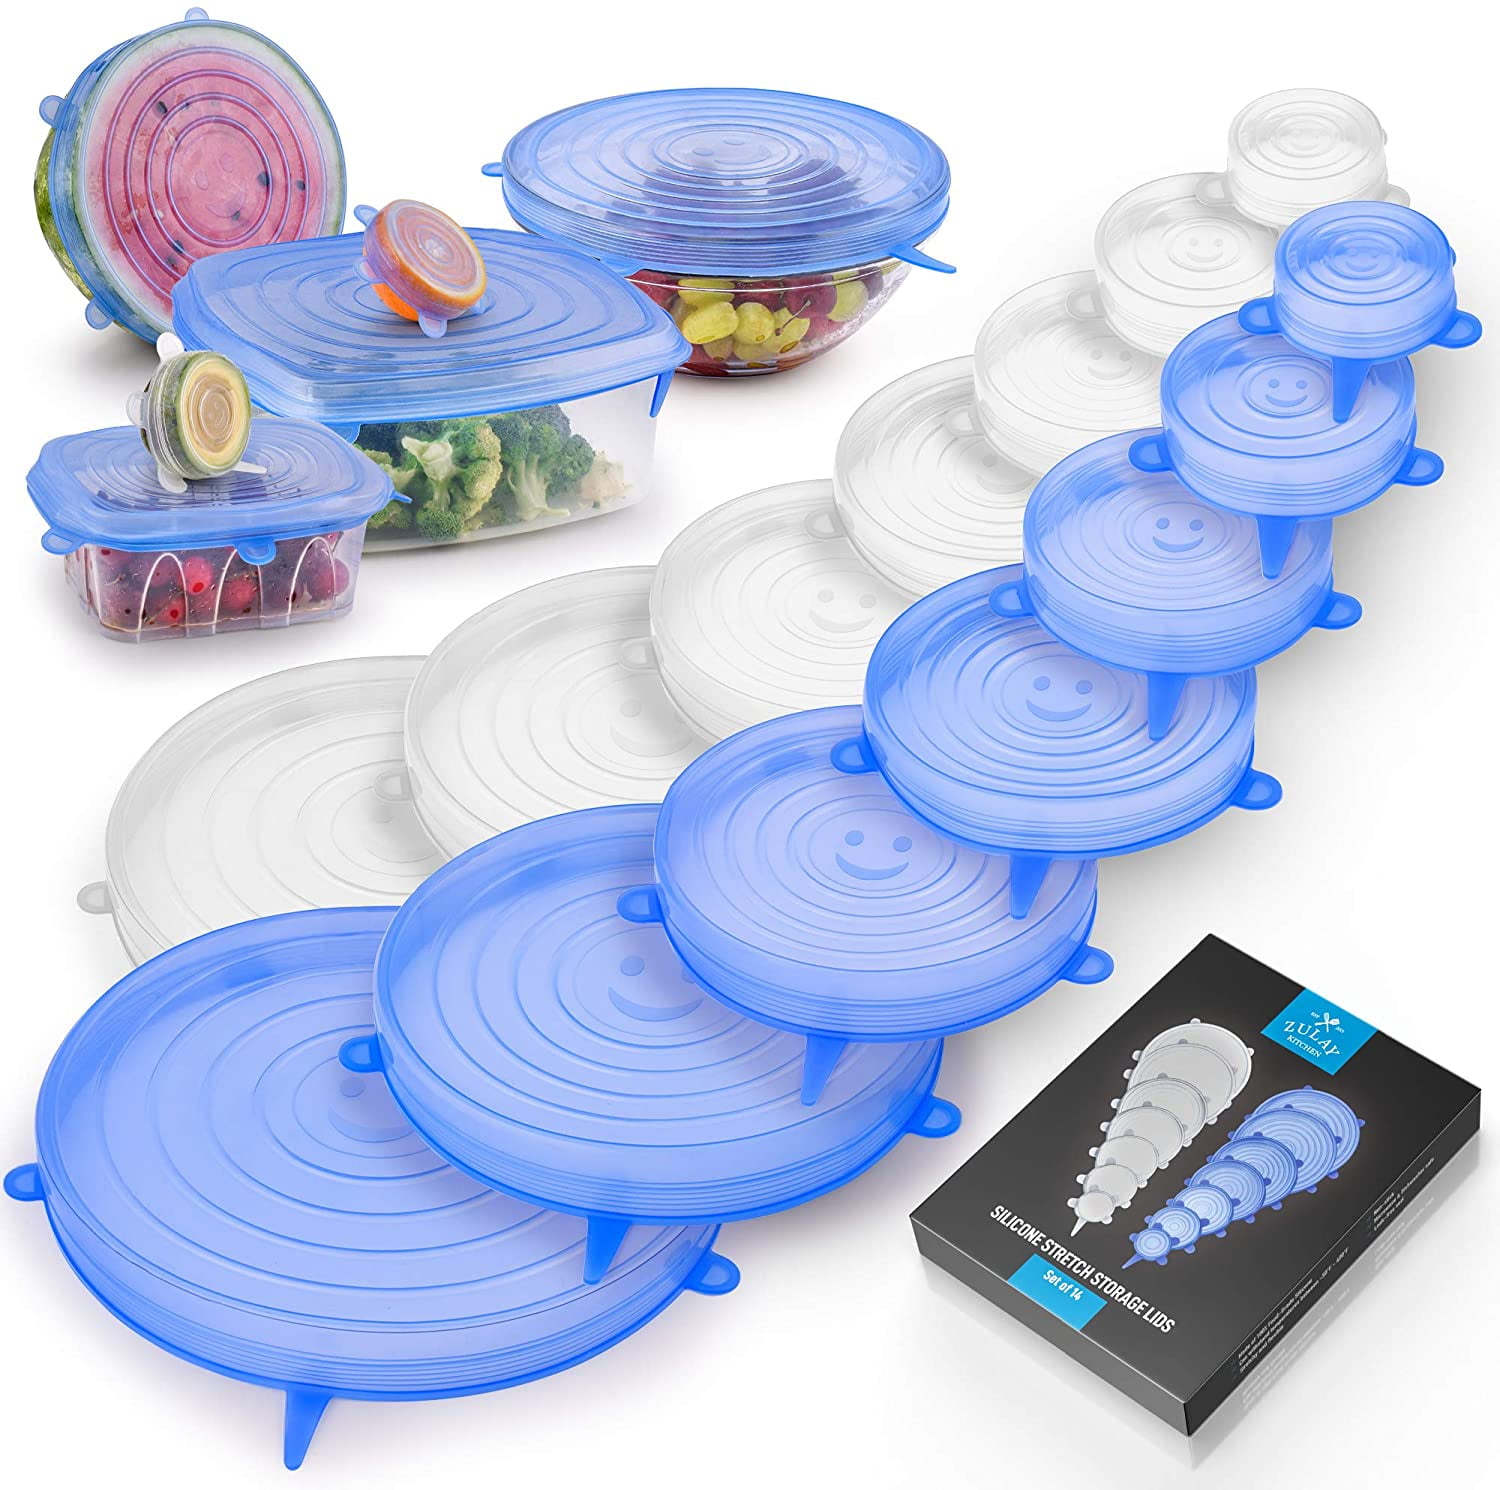 Reusable Premium Silicone Stretch and Seal Lids 14PCS for Food Storage,  Flexible Round Silicone Bowl Covers, 7 Different Sizes - Keep Food Fresh,  by